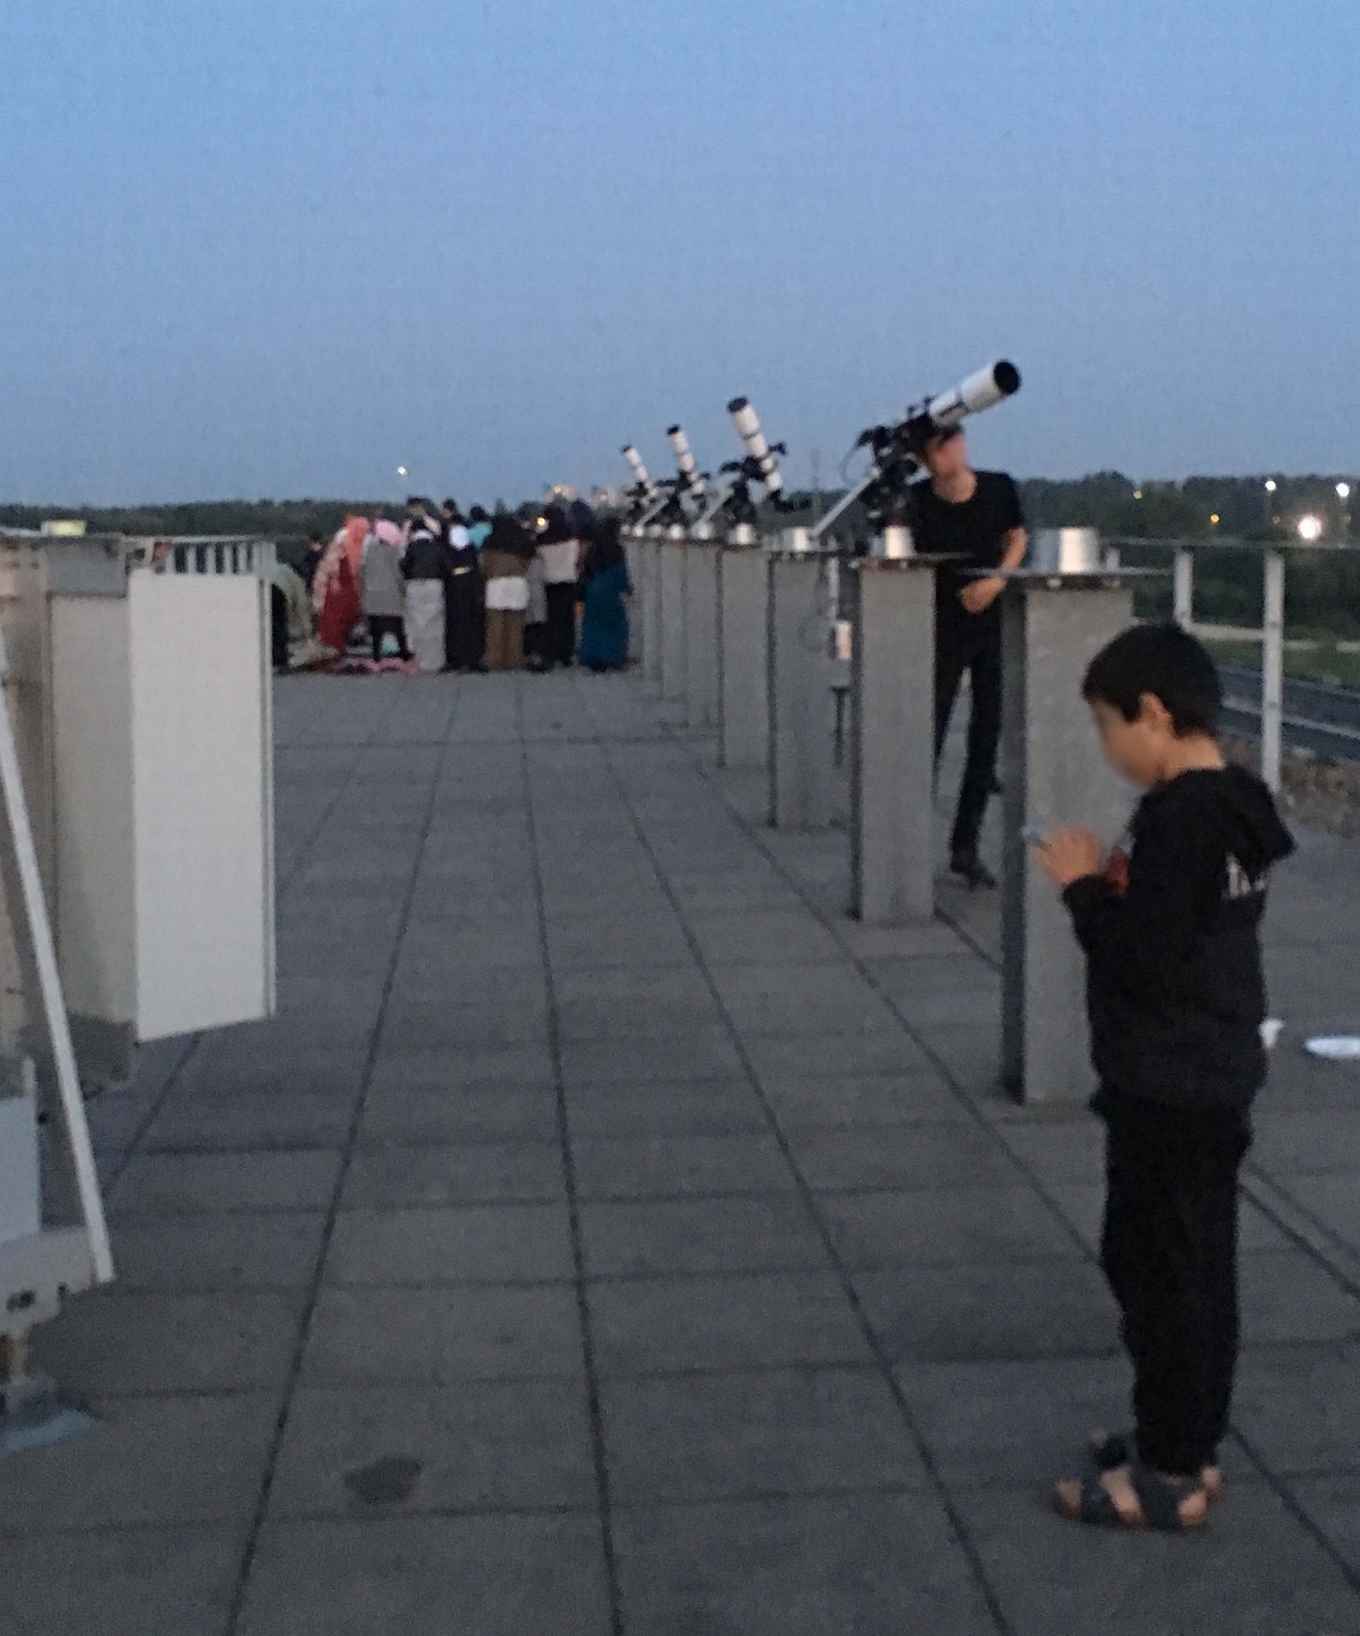 A group of people on the roof at the Anton Pannekoek Institute during one of the Altair events.